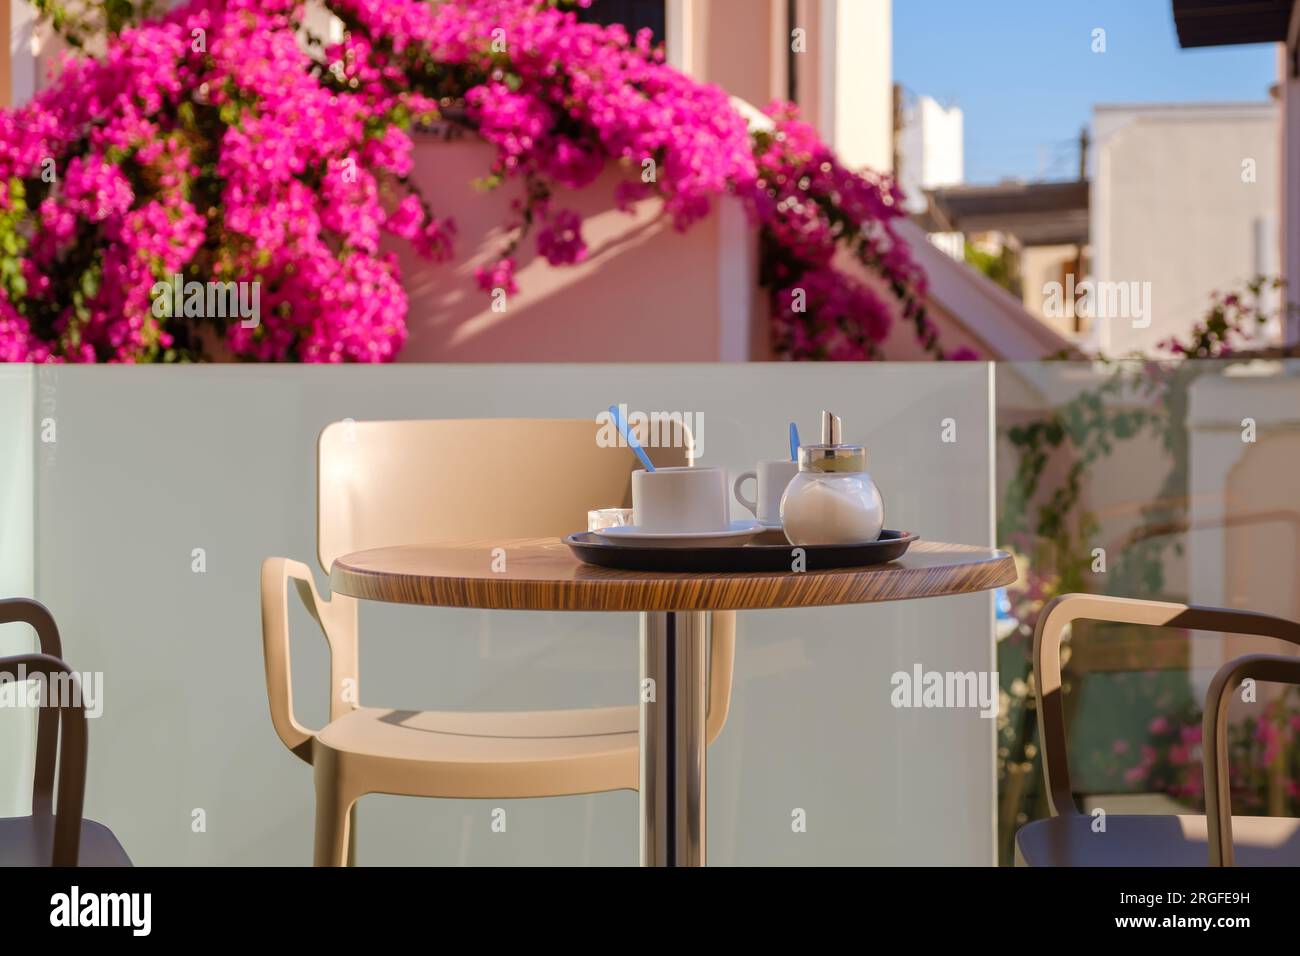 View of two coffee mugs and a sugar shaker on a table surrounded by chairs at a balcony in Fira Santorini Greece Stock Photo